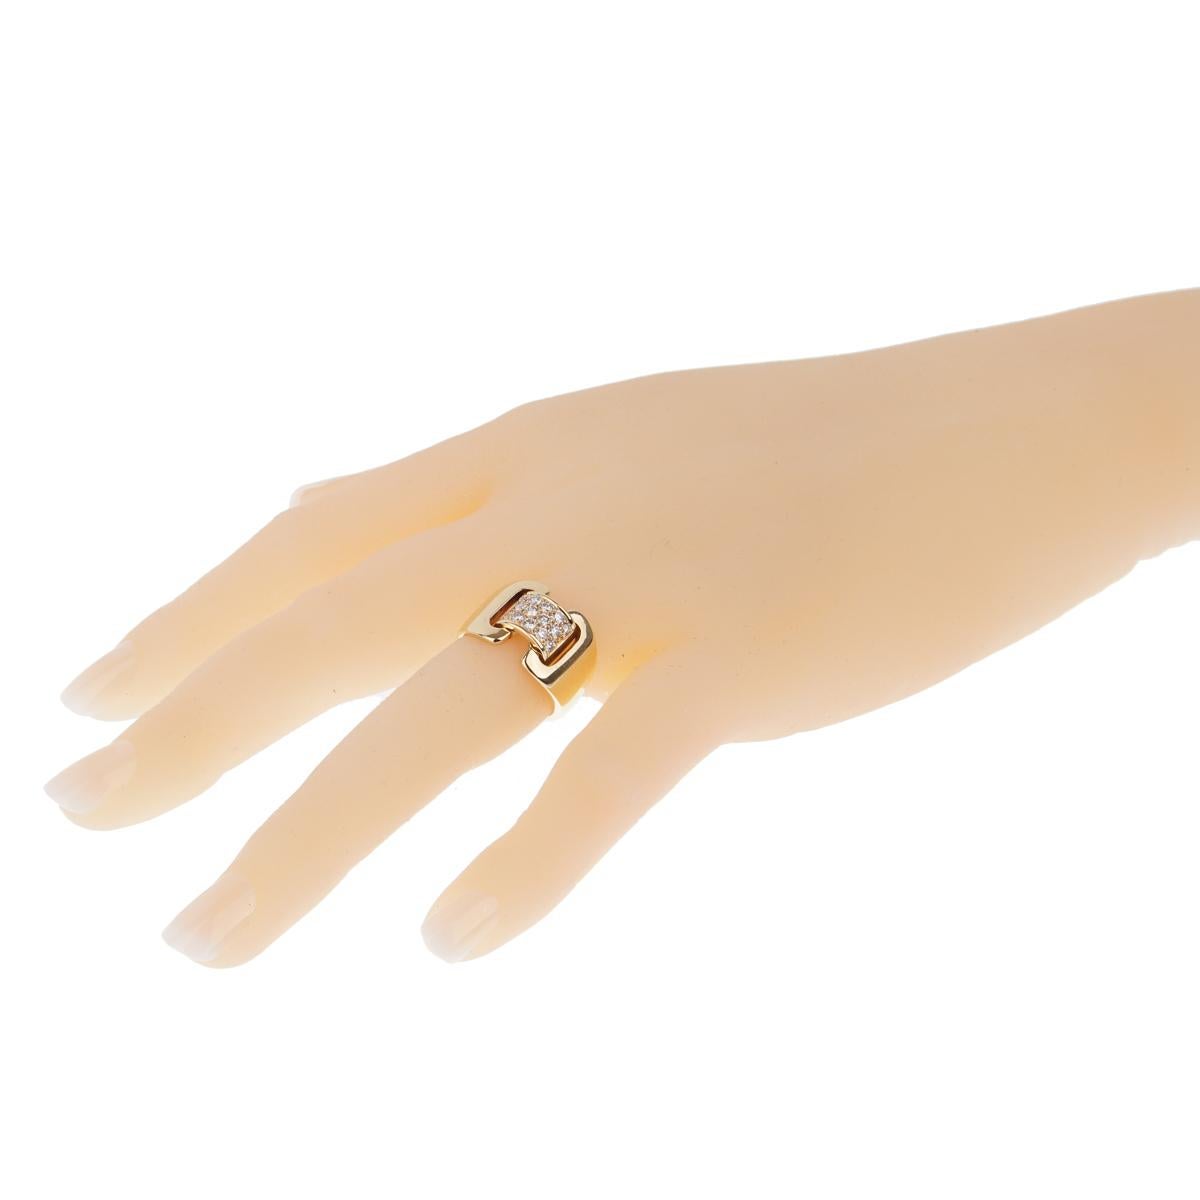 Crafted in 18kt yellow gold, the diamond yellow gold cocktail ring's wide bands connect with a square motif adorned with the finest Hermes round brilliant cut diamonds (.38cts) in 18k yellow gold.

Width: .51